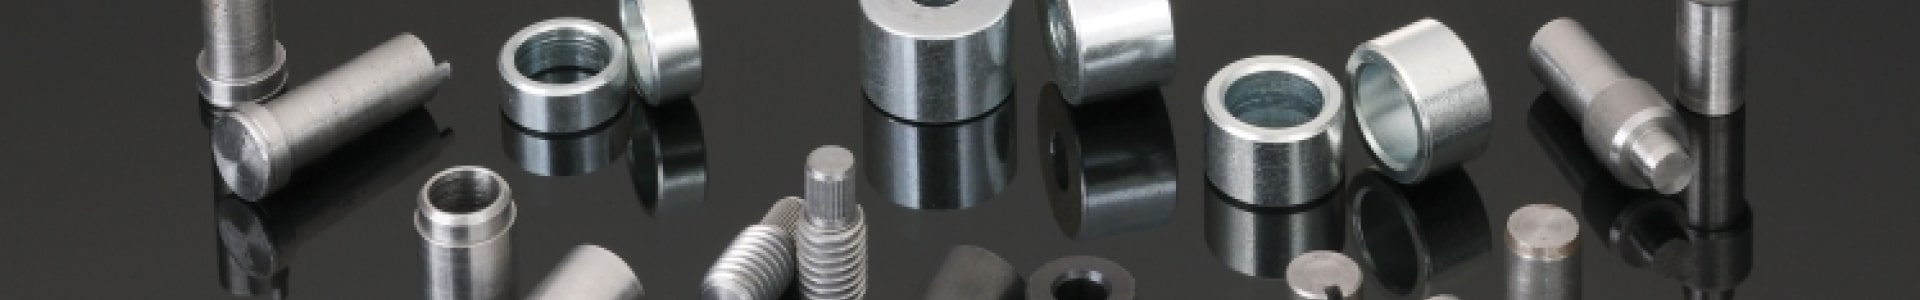 raghmohan industries design high quality precision products for industrial purpose